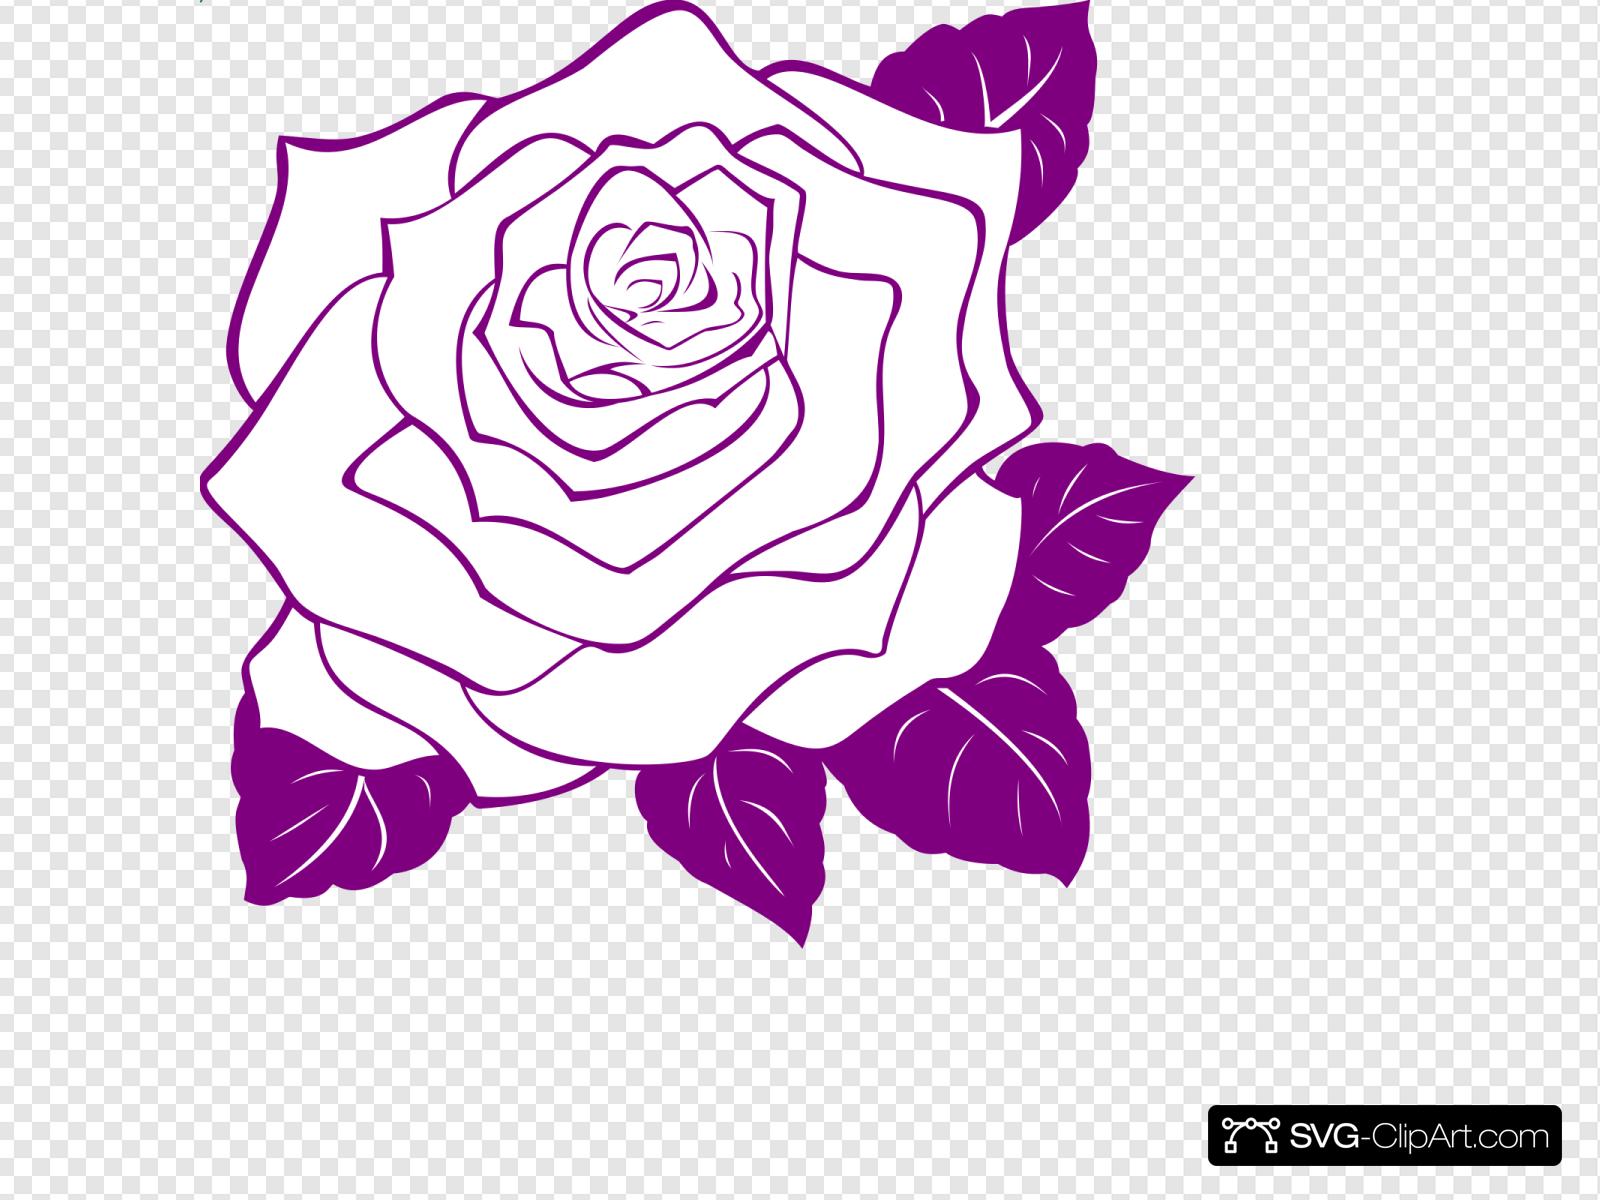 White Rose With Purple Outline Clip art, Icon and SVG